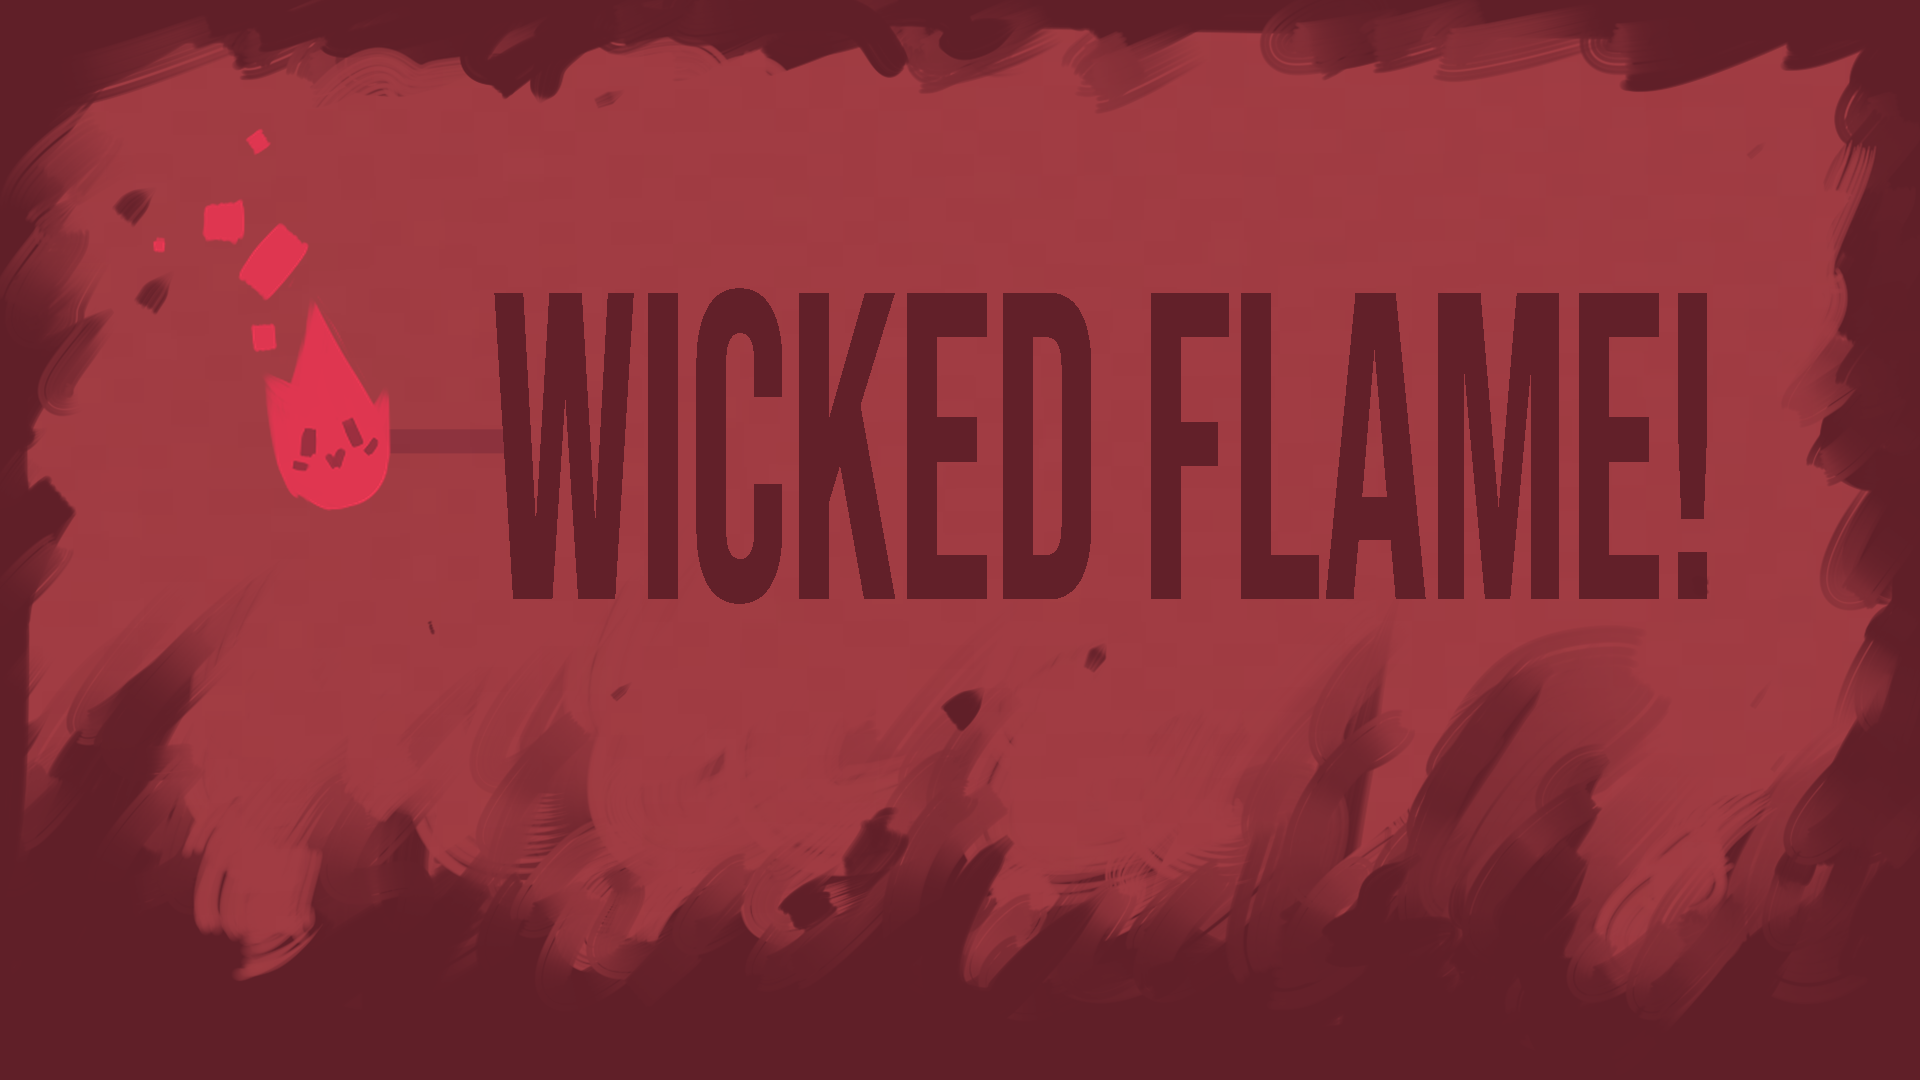 Wicked flame!